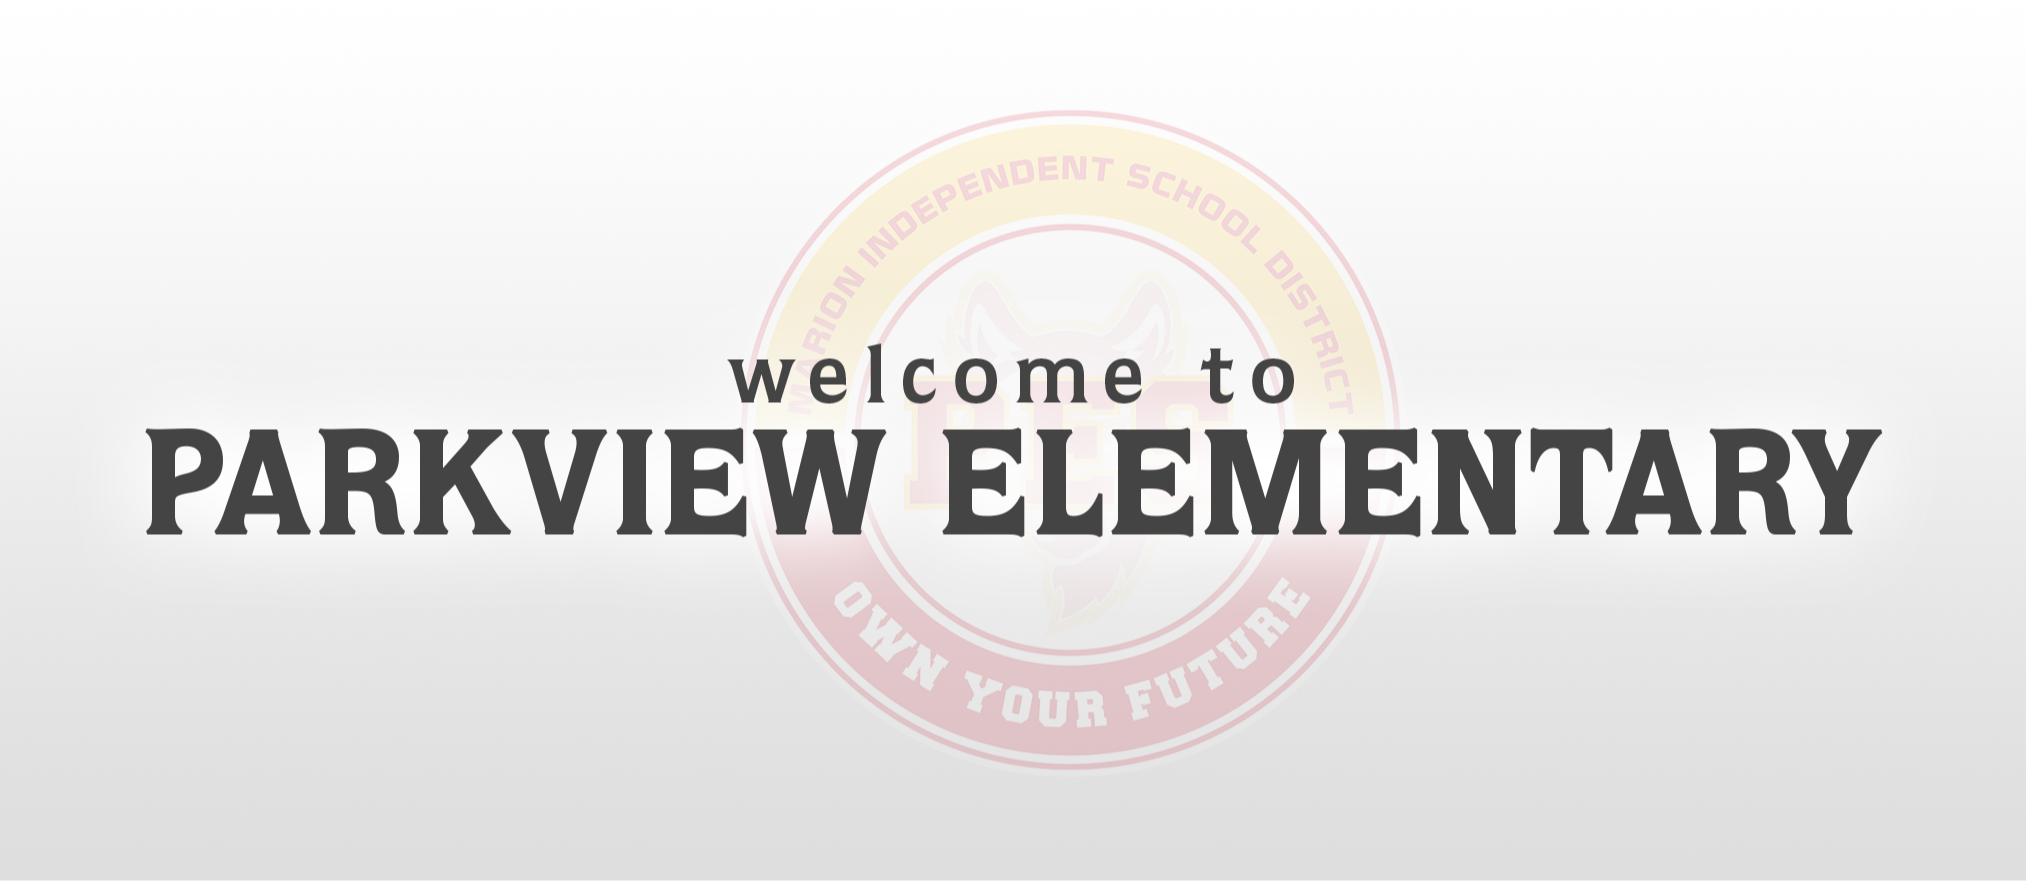 Welcome to Parkview Elementary with image of logo 